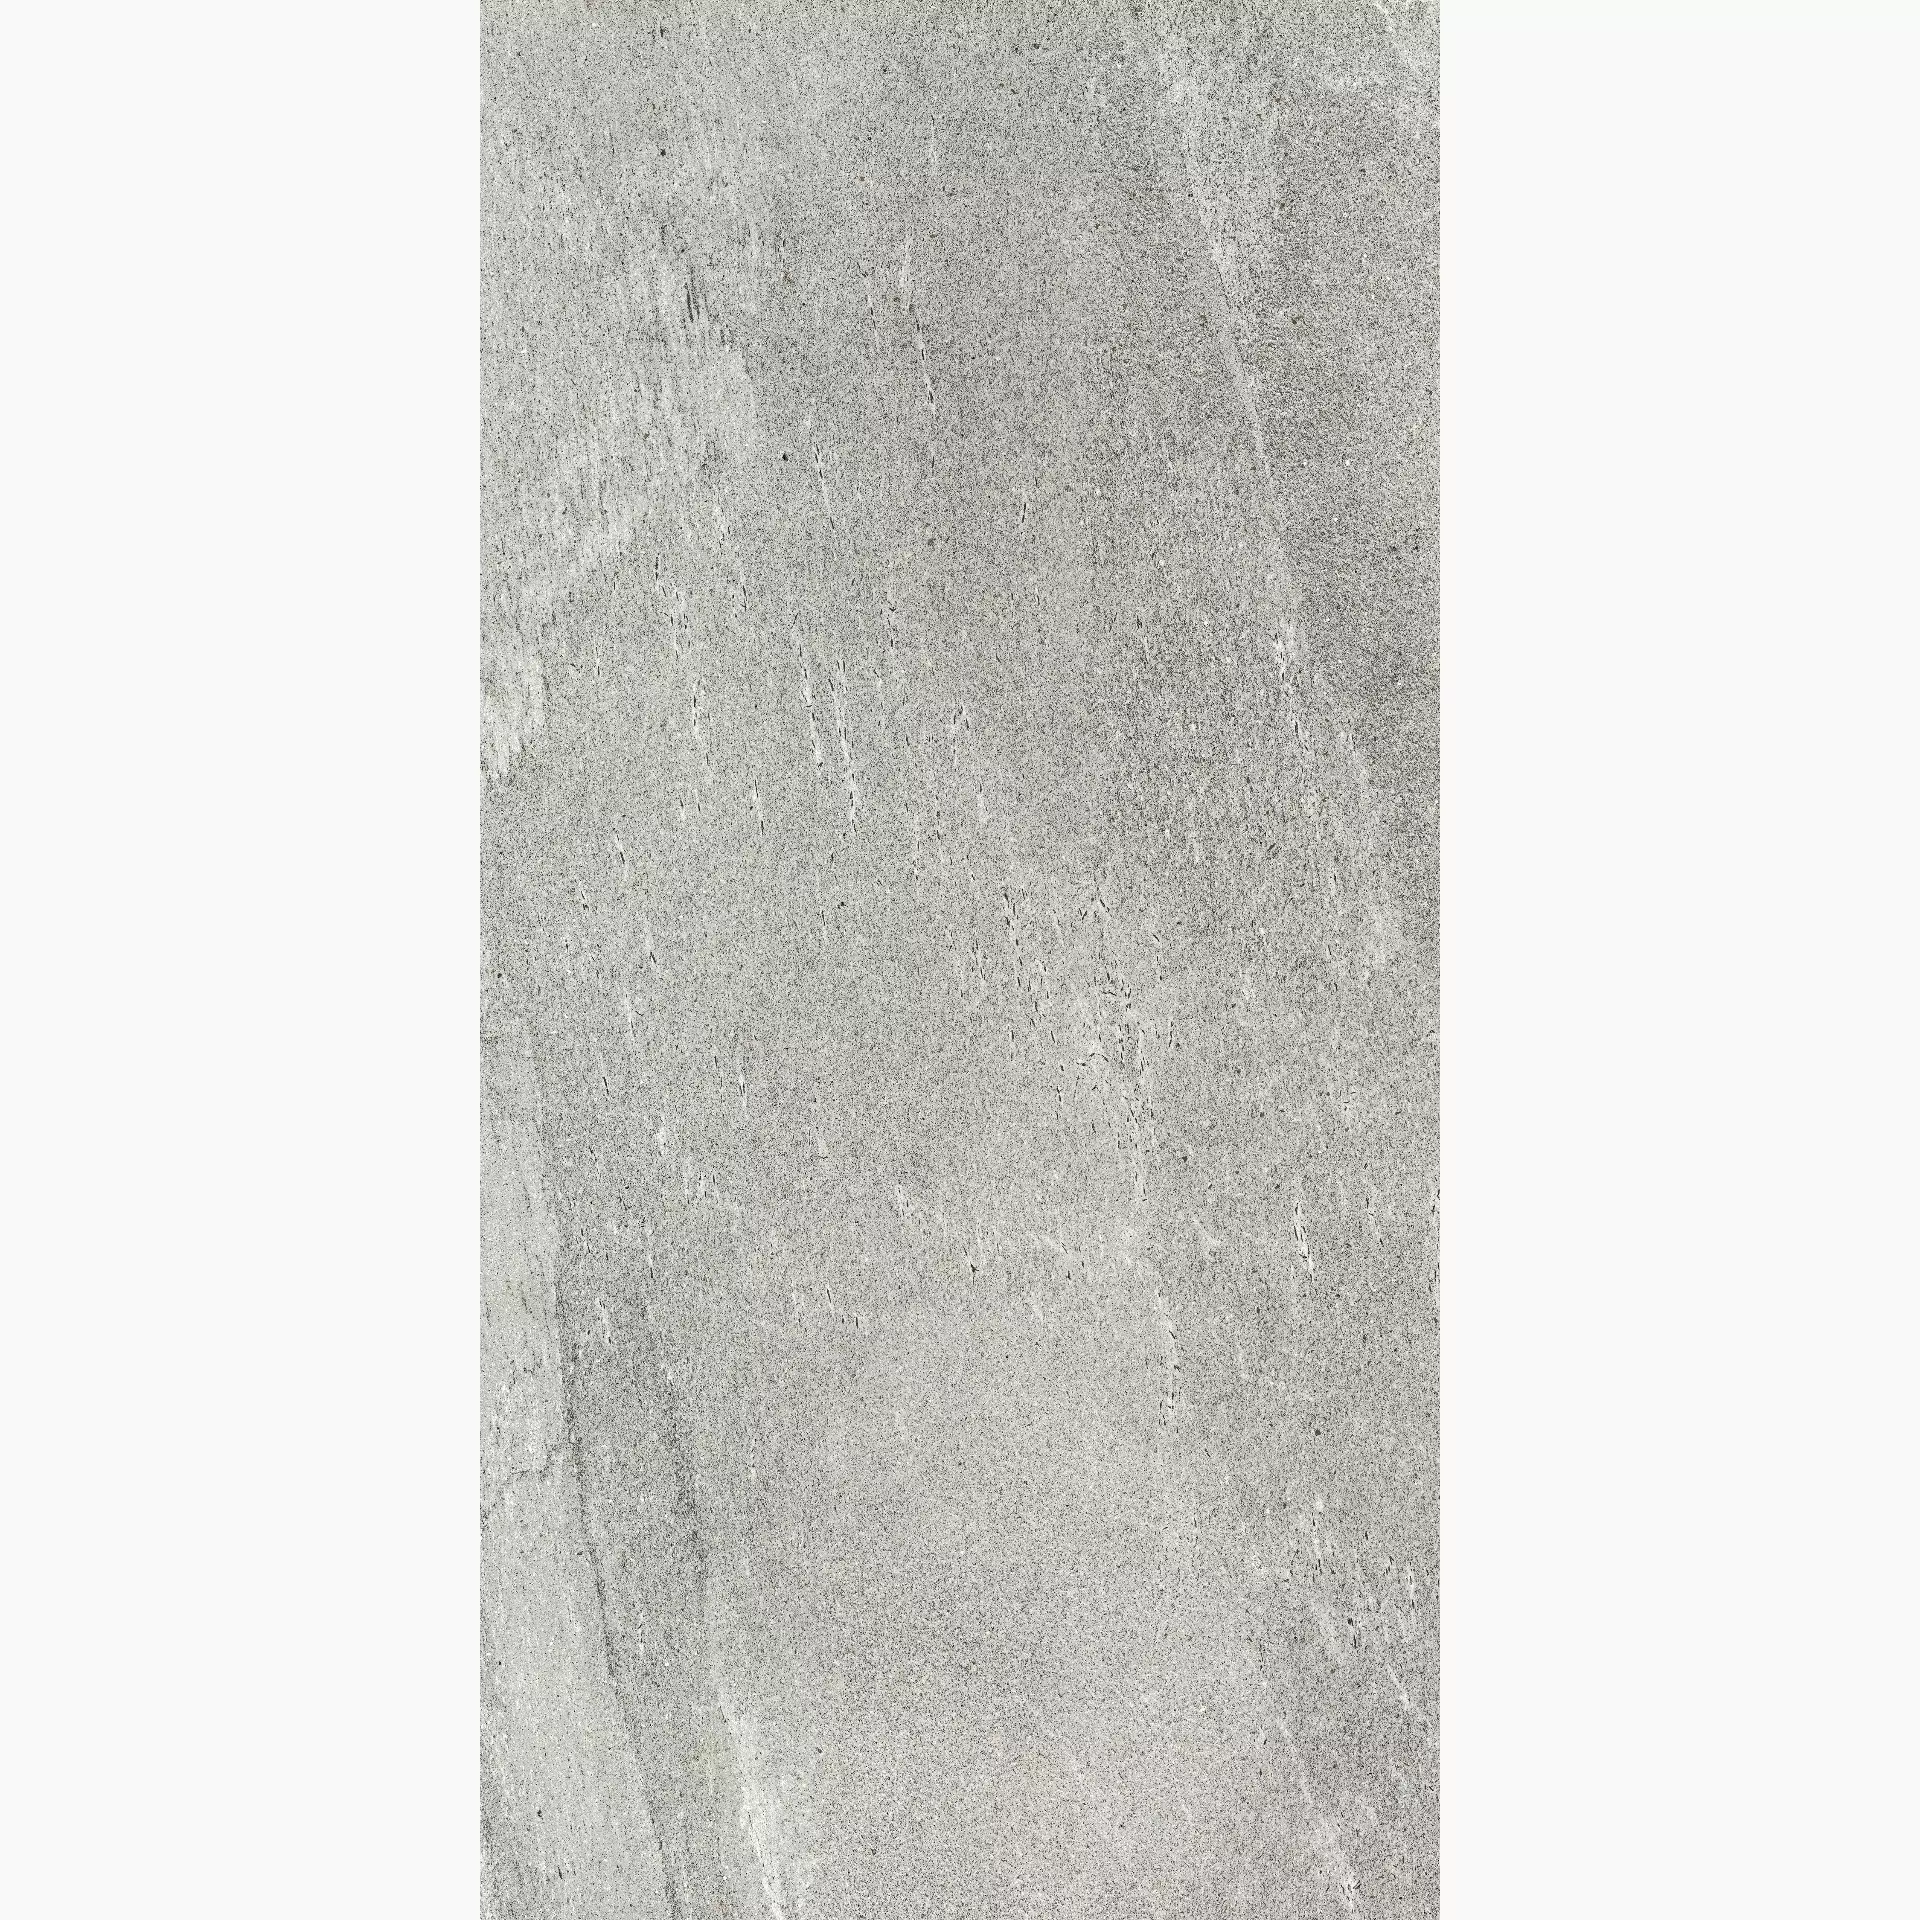 Cottodeste Blend Stone Light Naturale Protect EGEBS20 90x180cm rectified 14mm